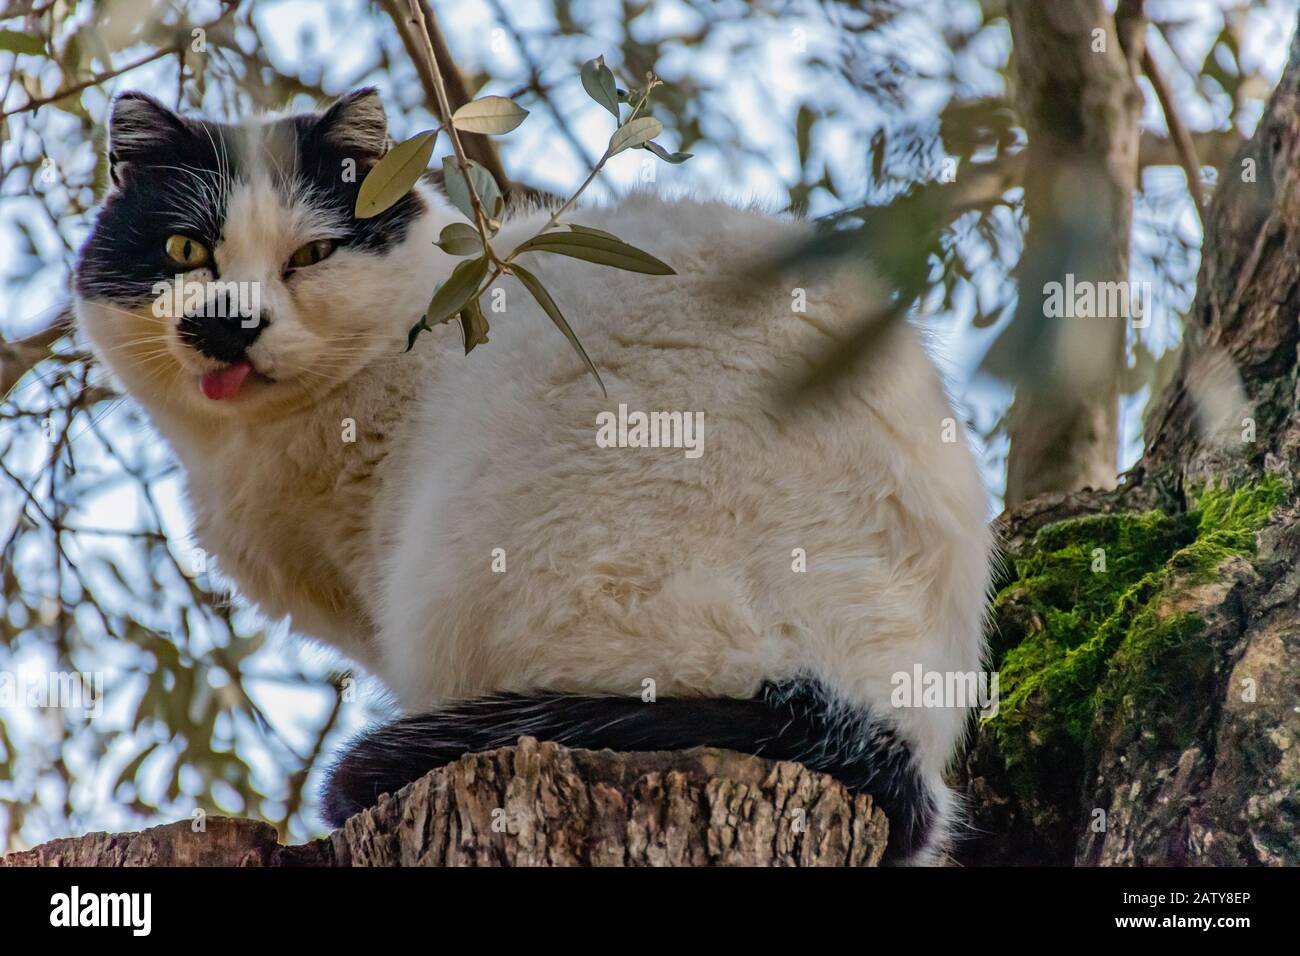 A dumb looking cat sitting on a tree stump with its tongue out looking surprised Stock Photo